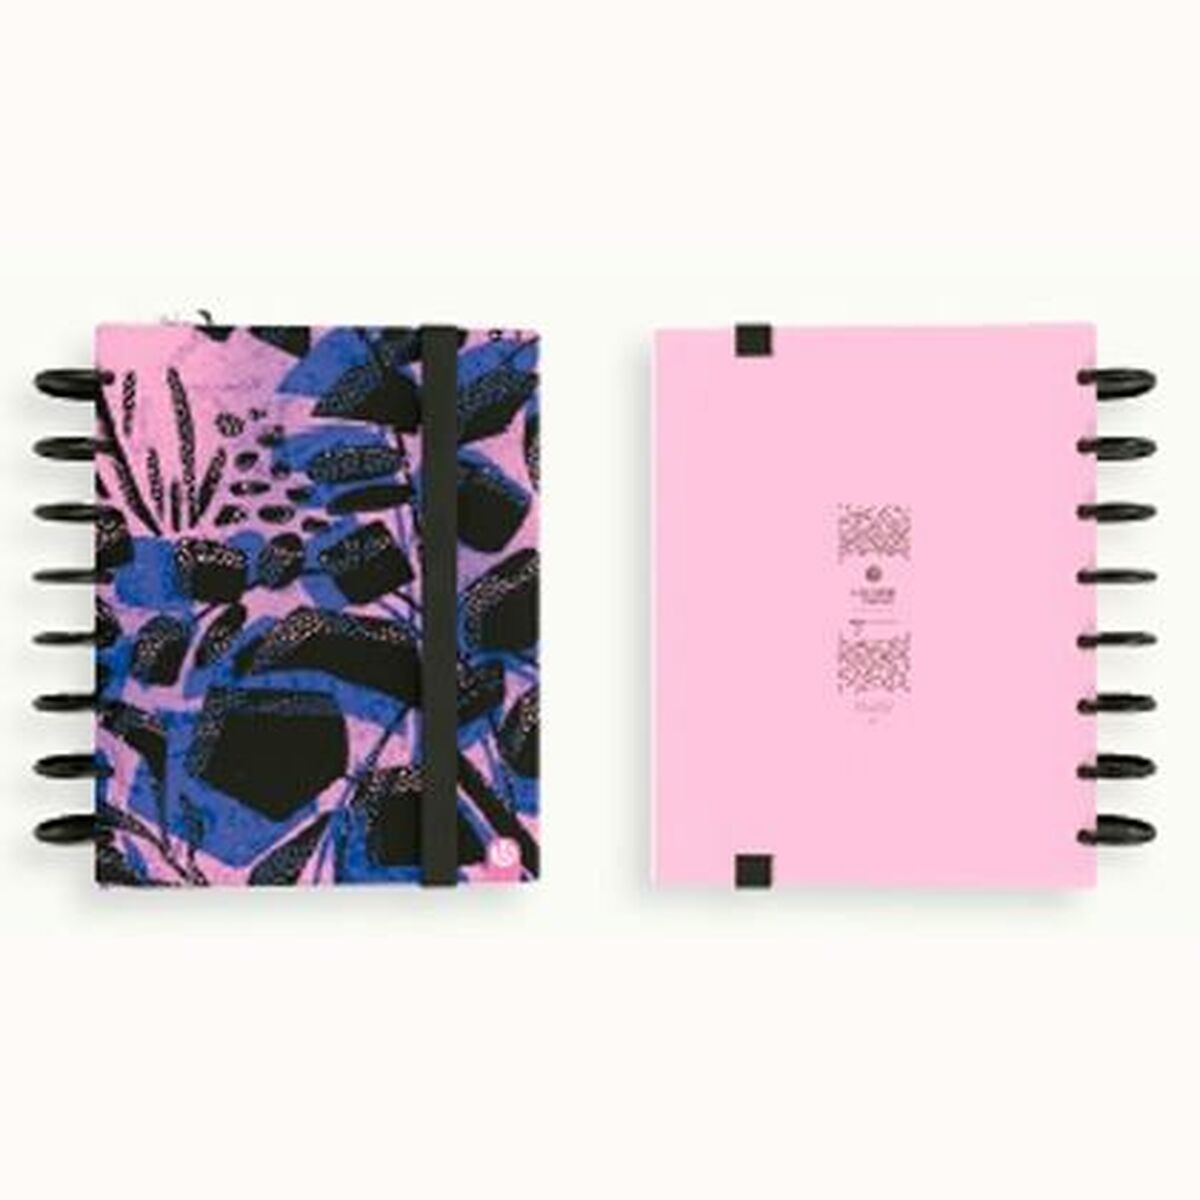 Diary Carchivo My Planner Ingeniox 1 Unit Pink A5